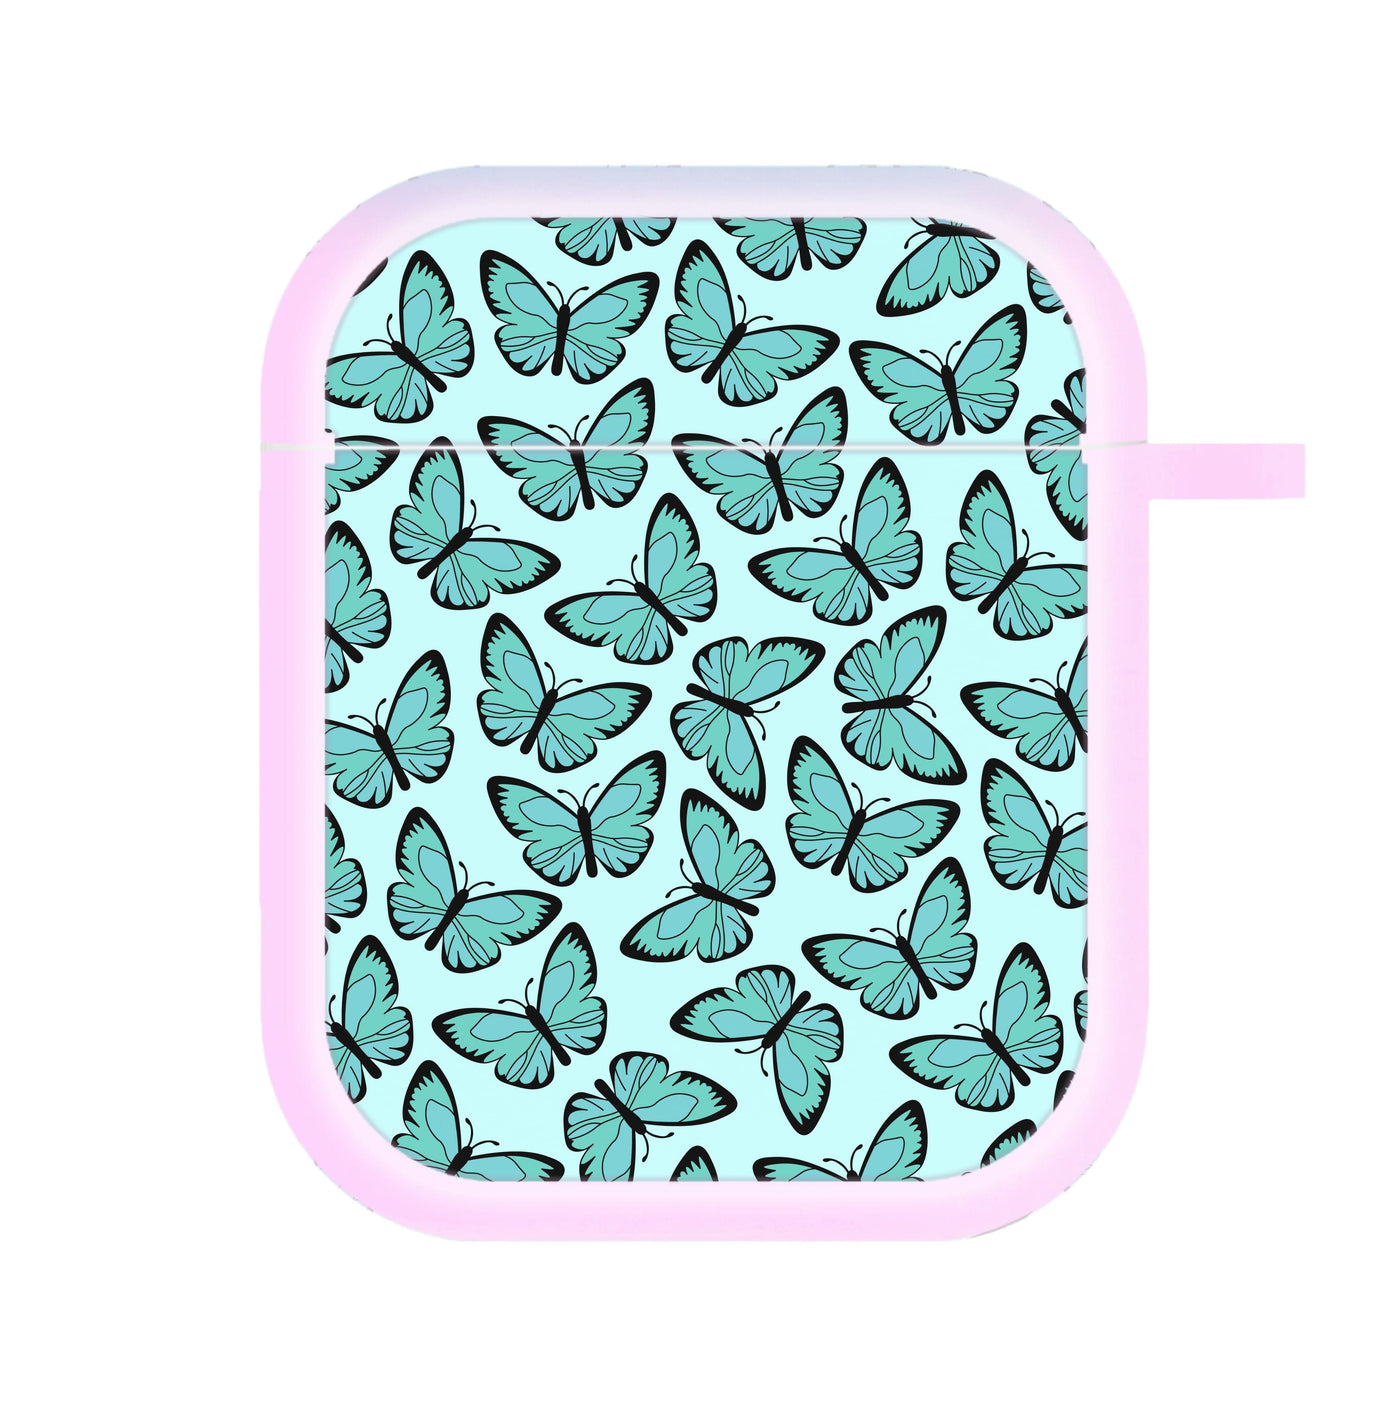 Blue Butterfly - Butterfly Patterns AirPods Case